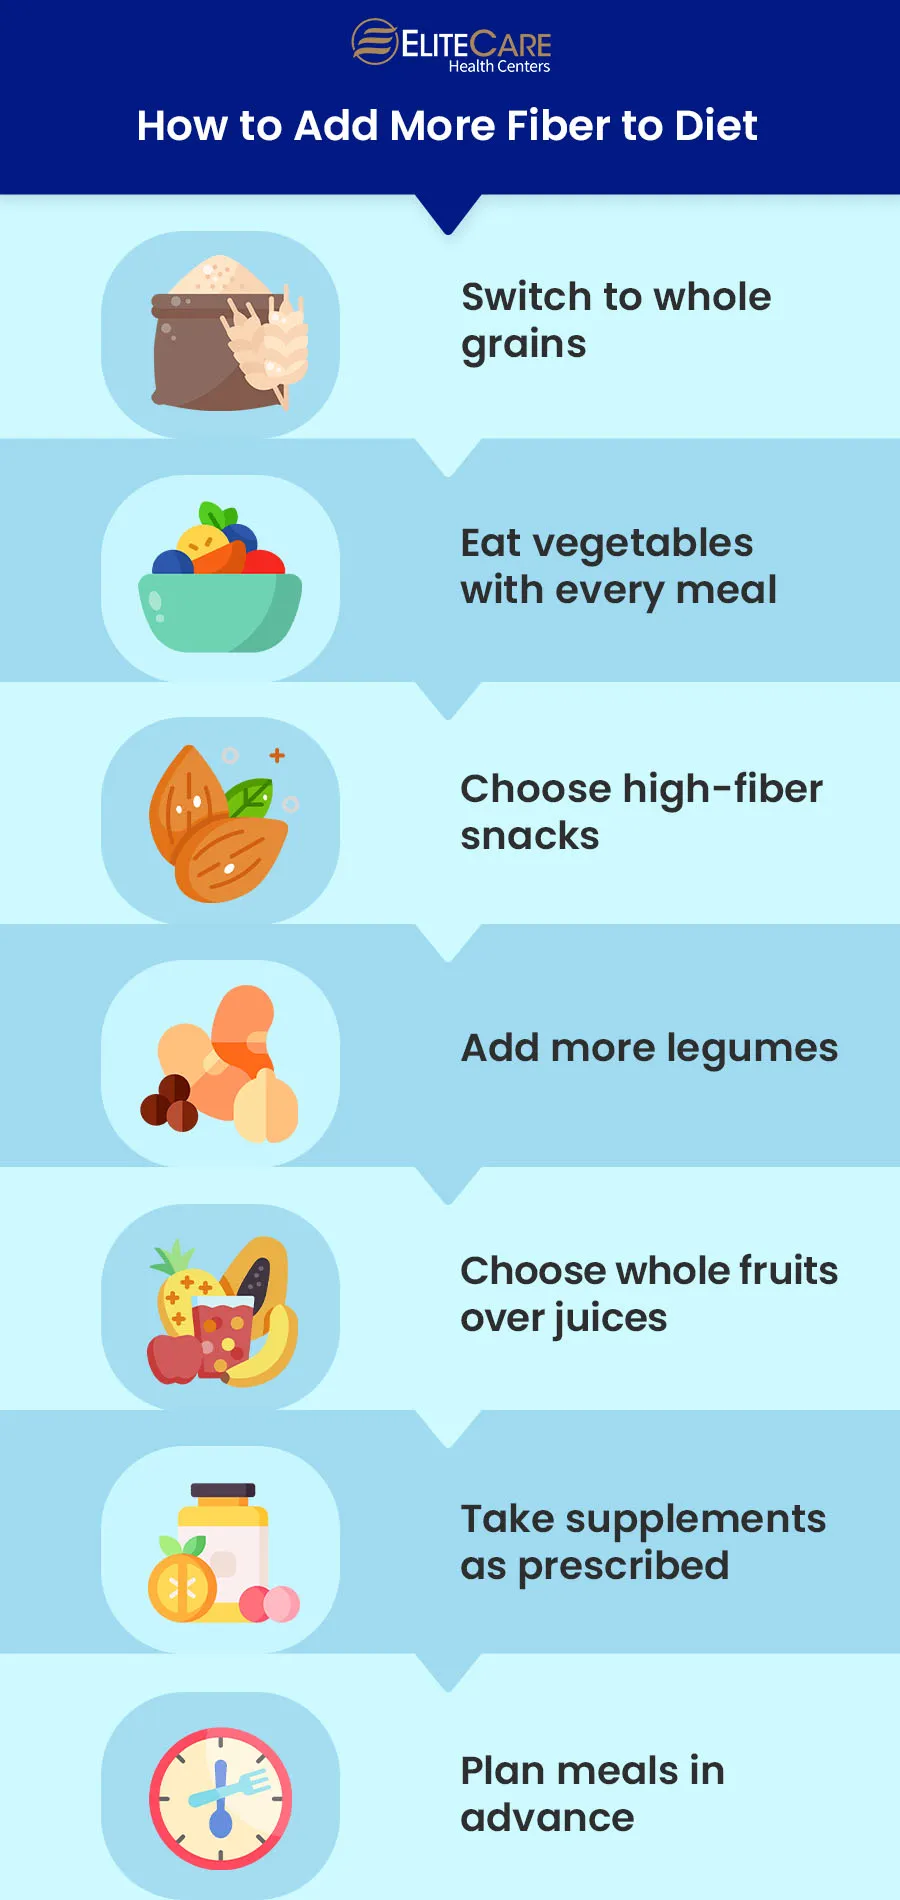 How to Add More Fiber to Diet